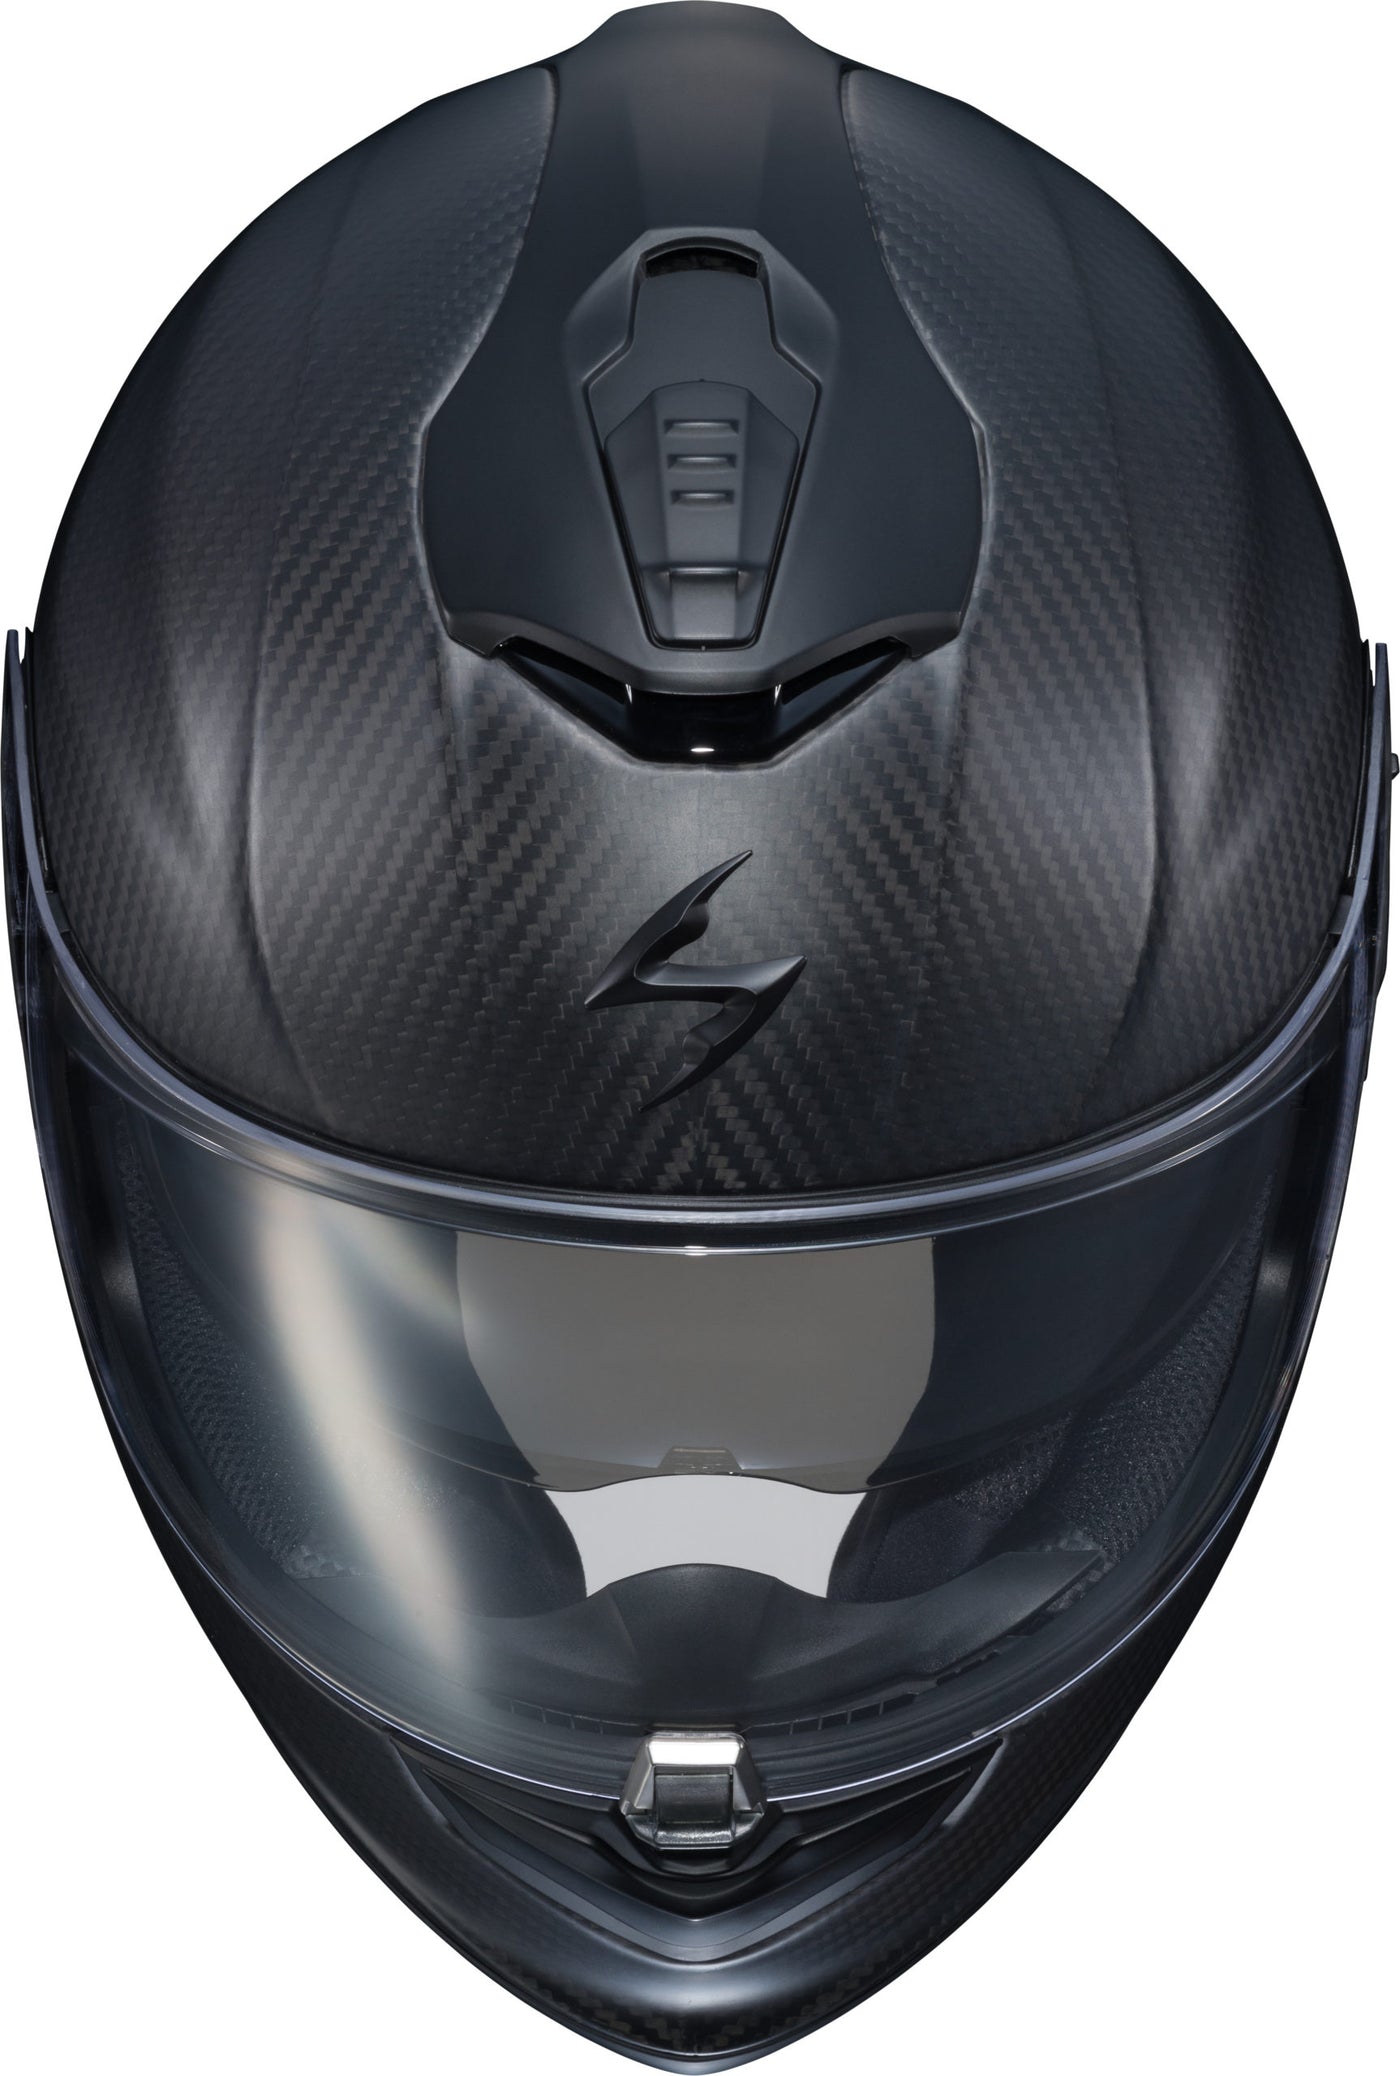 SCORPION EXO EXO-ST1400 Carbon Solid Full Face Motorcycle Helmet